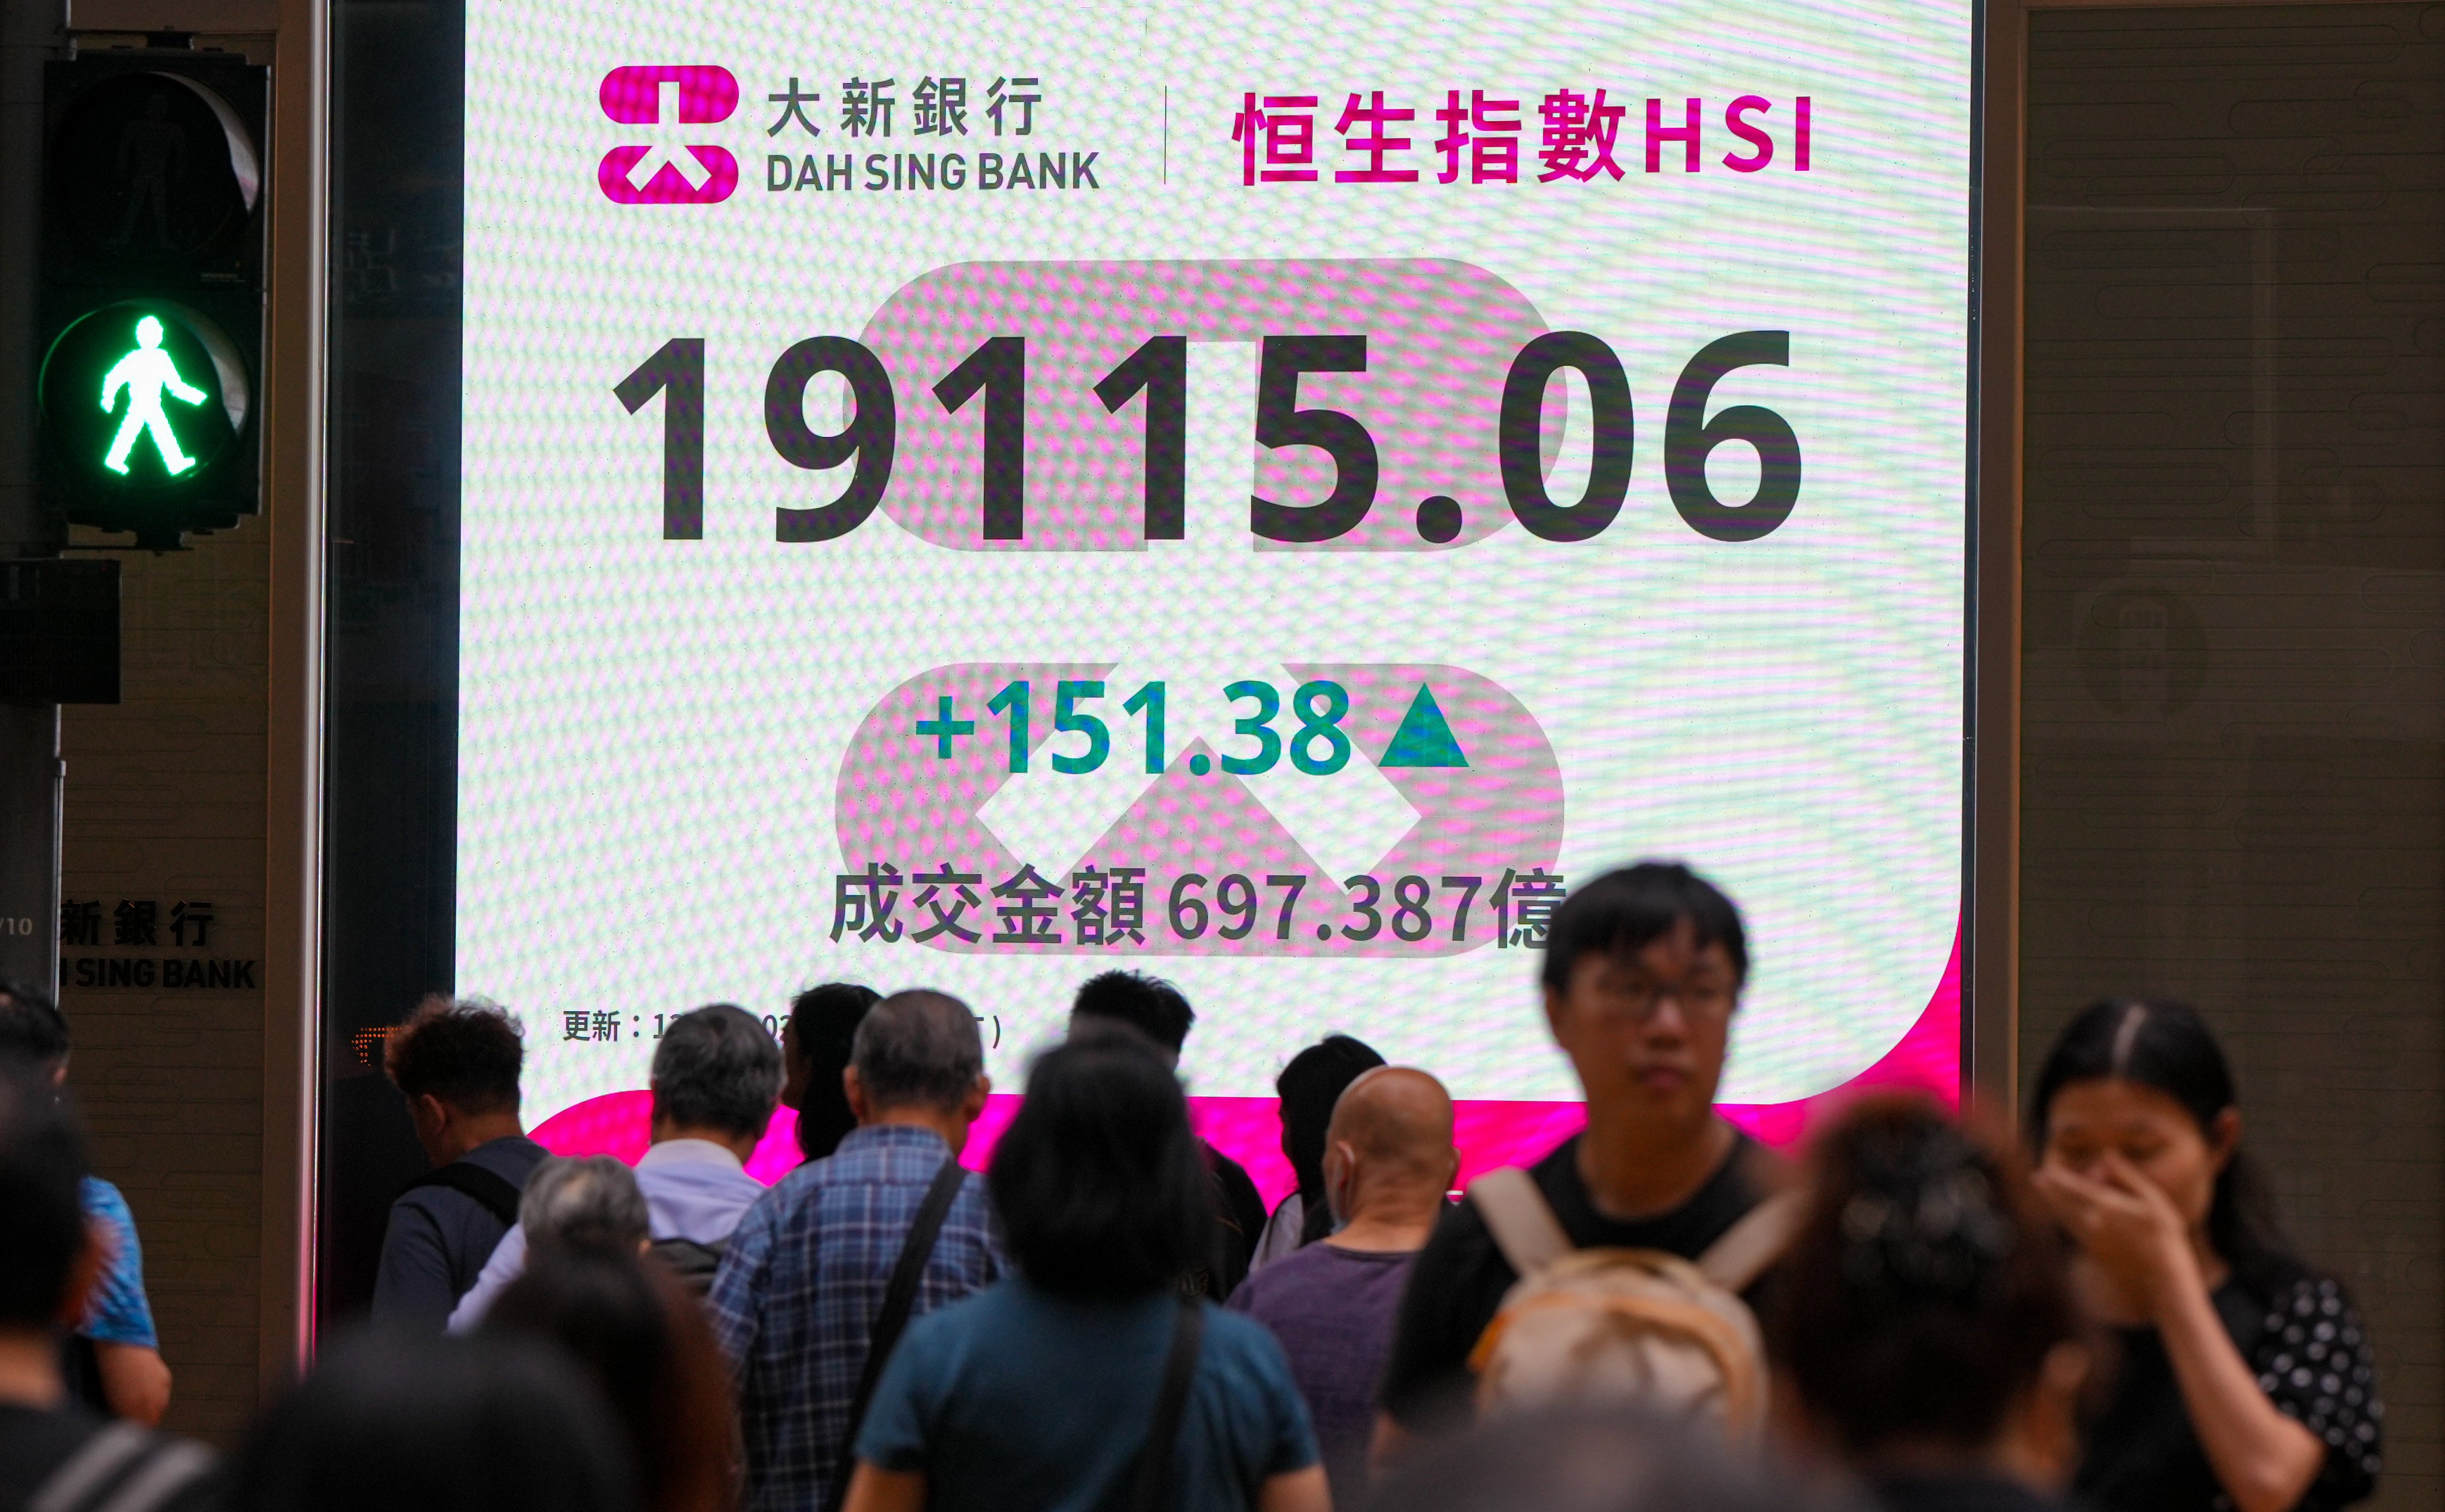 A technical bull run has lifted the Hang Seng Index above the 19,000 level for the first time since August. Photo: Sam Tsang